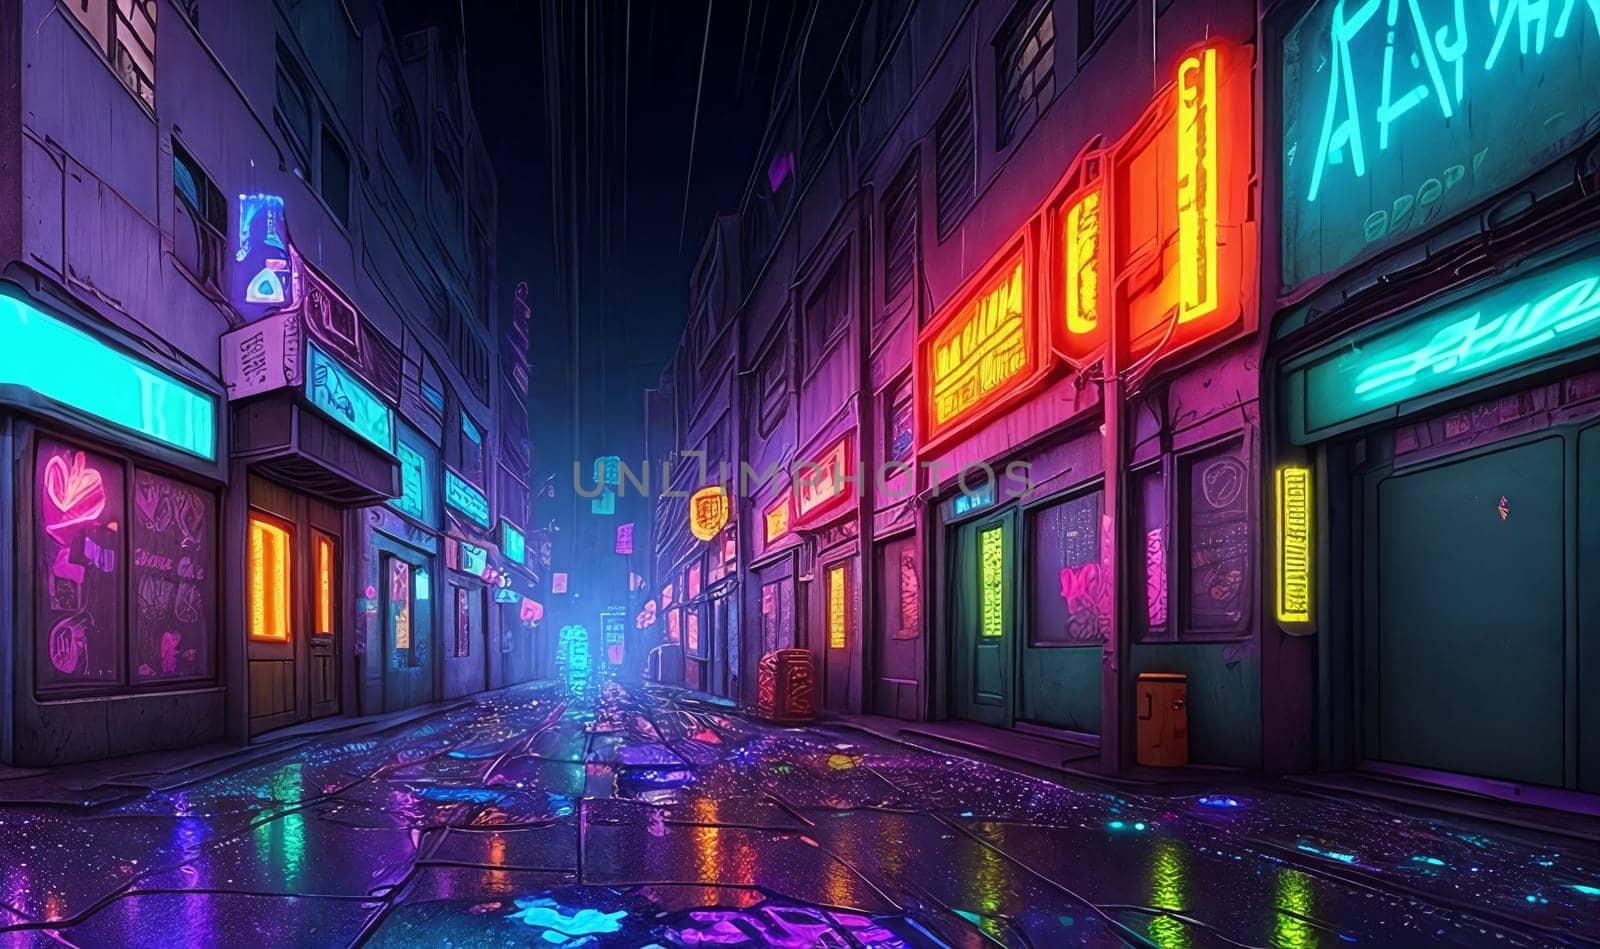 In a cyberpunk alley, neon signs cast a gritty glow on holographic graffiti, rain-soaked pavement glistens. by GoodOlga